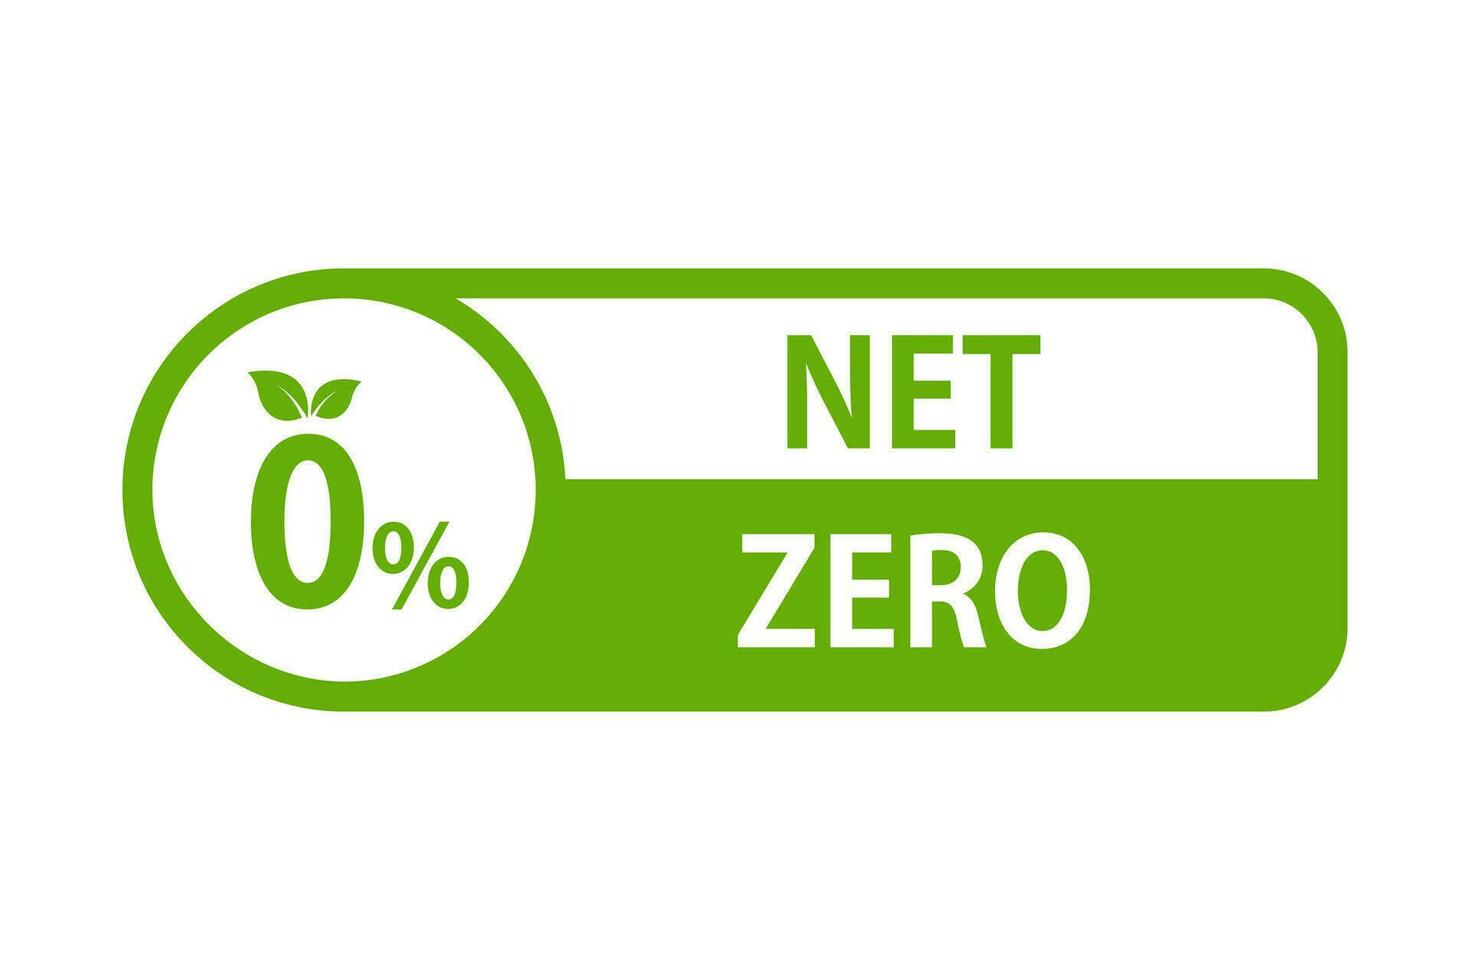 net zero carbon footprint icon vector emissions free no atmosphere pollution CO2 neutral stamp for graphic design, logo, website, social media, mobile app, UI